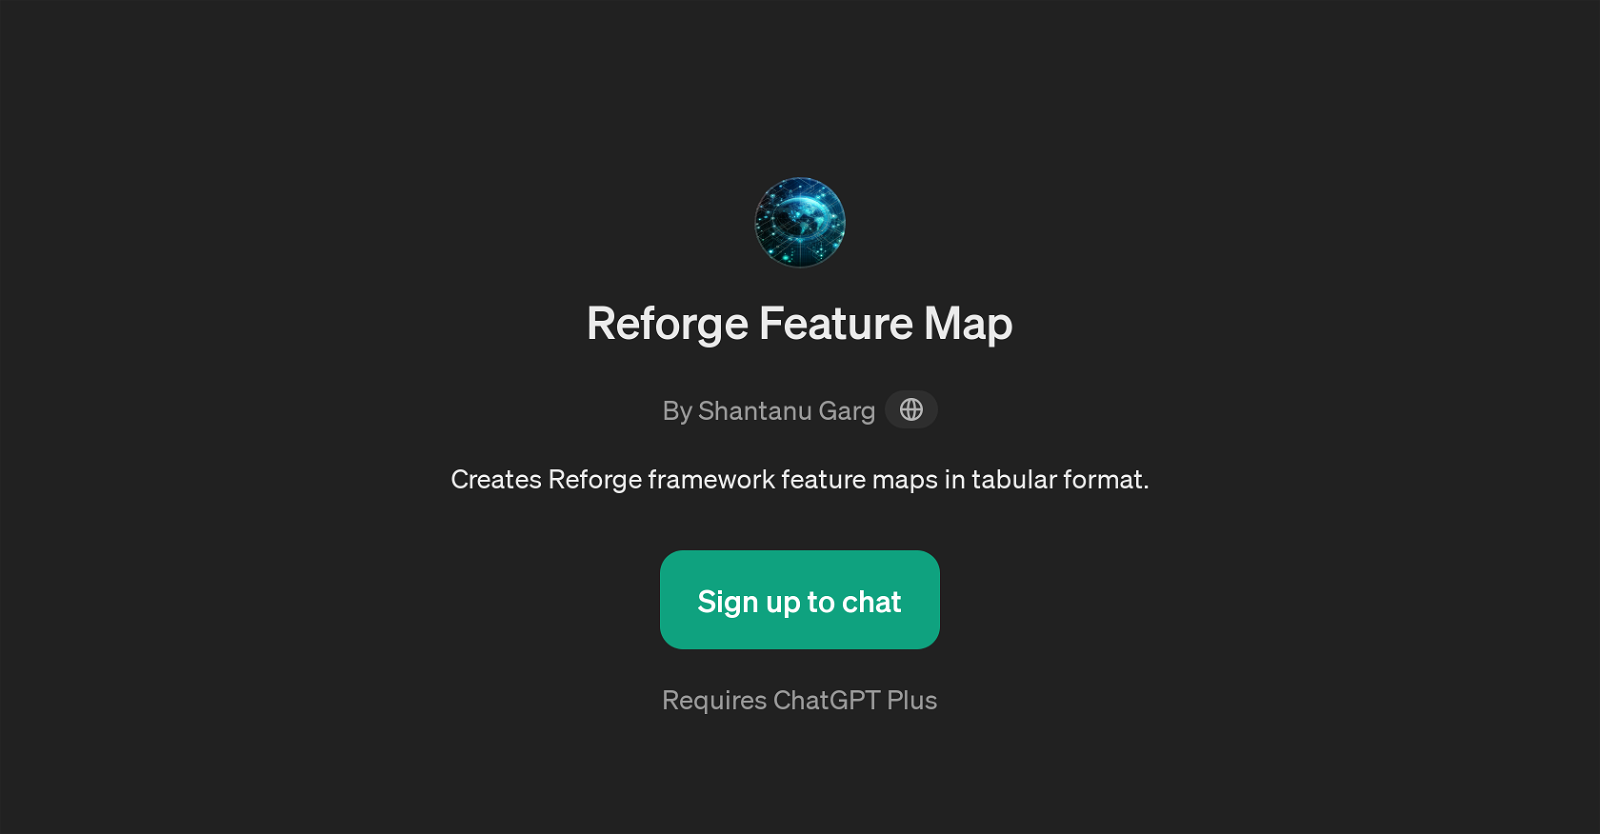 Reforge Feature Map website